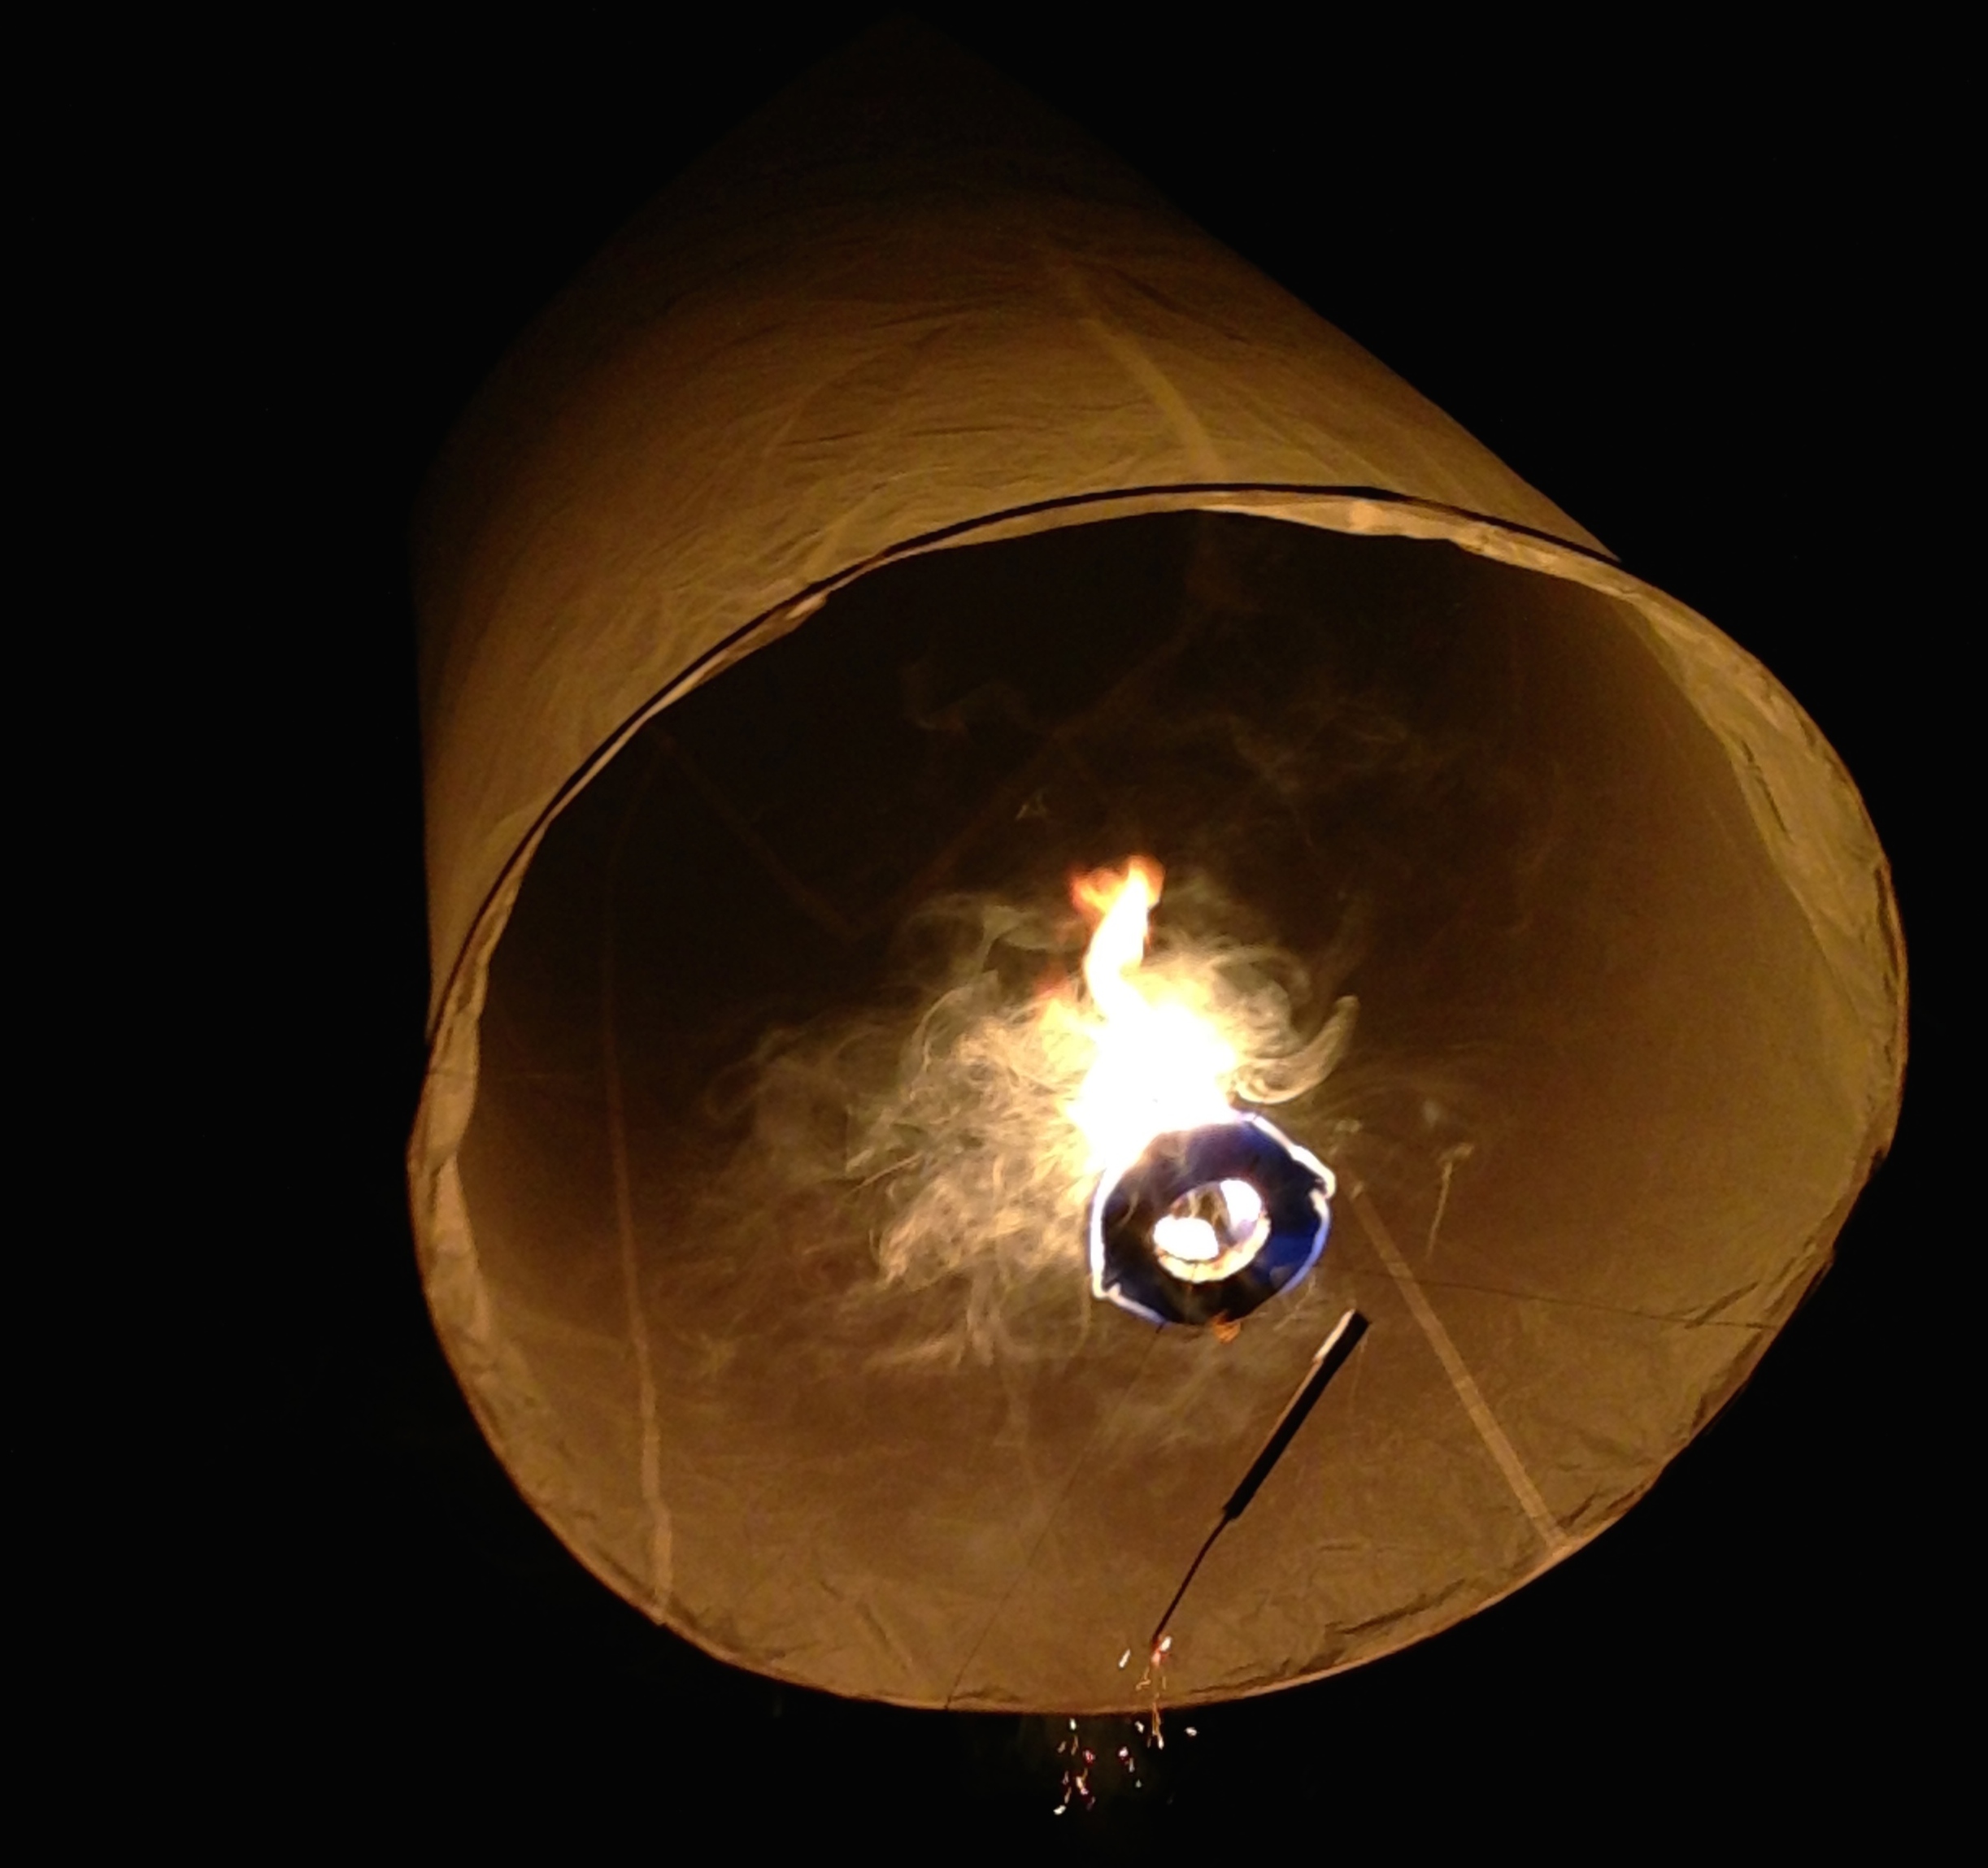  Thailand.&nbsp;On my&nbsp;last night at the Four Seasons Tented Camp Golden Triangle&nbsp;we lit lanterns and sent them into the sky. The perfect ending for a standout stay.&nbsp; 